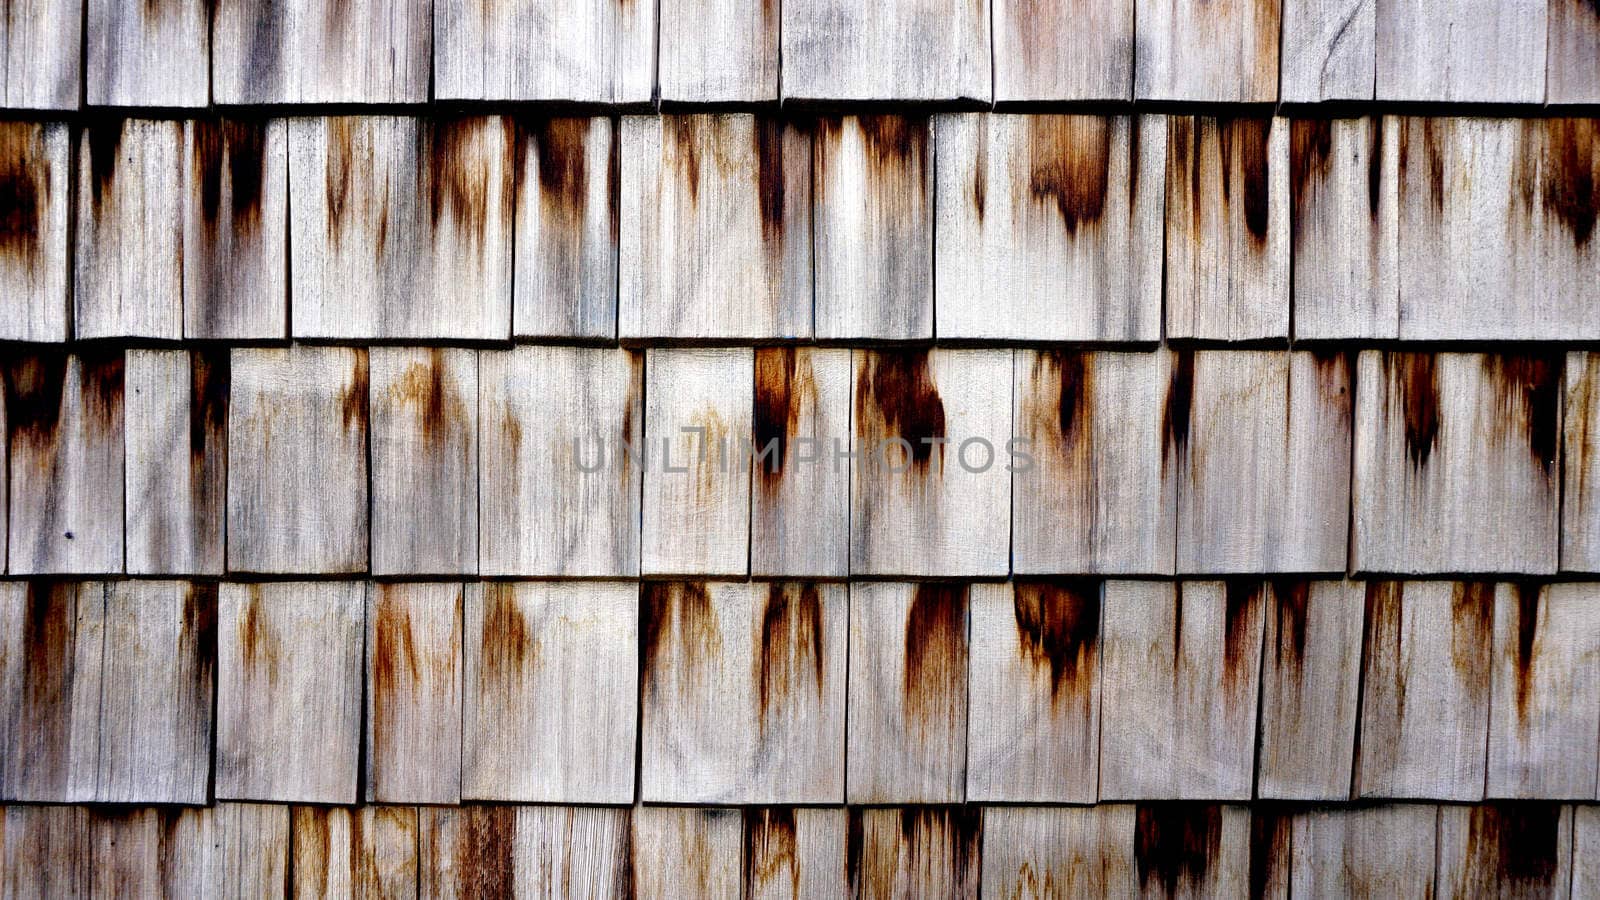 Wooden wall texture close up horizontal by polarbearstudio